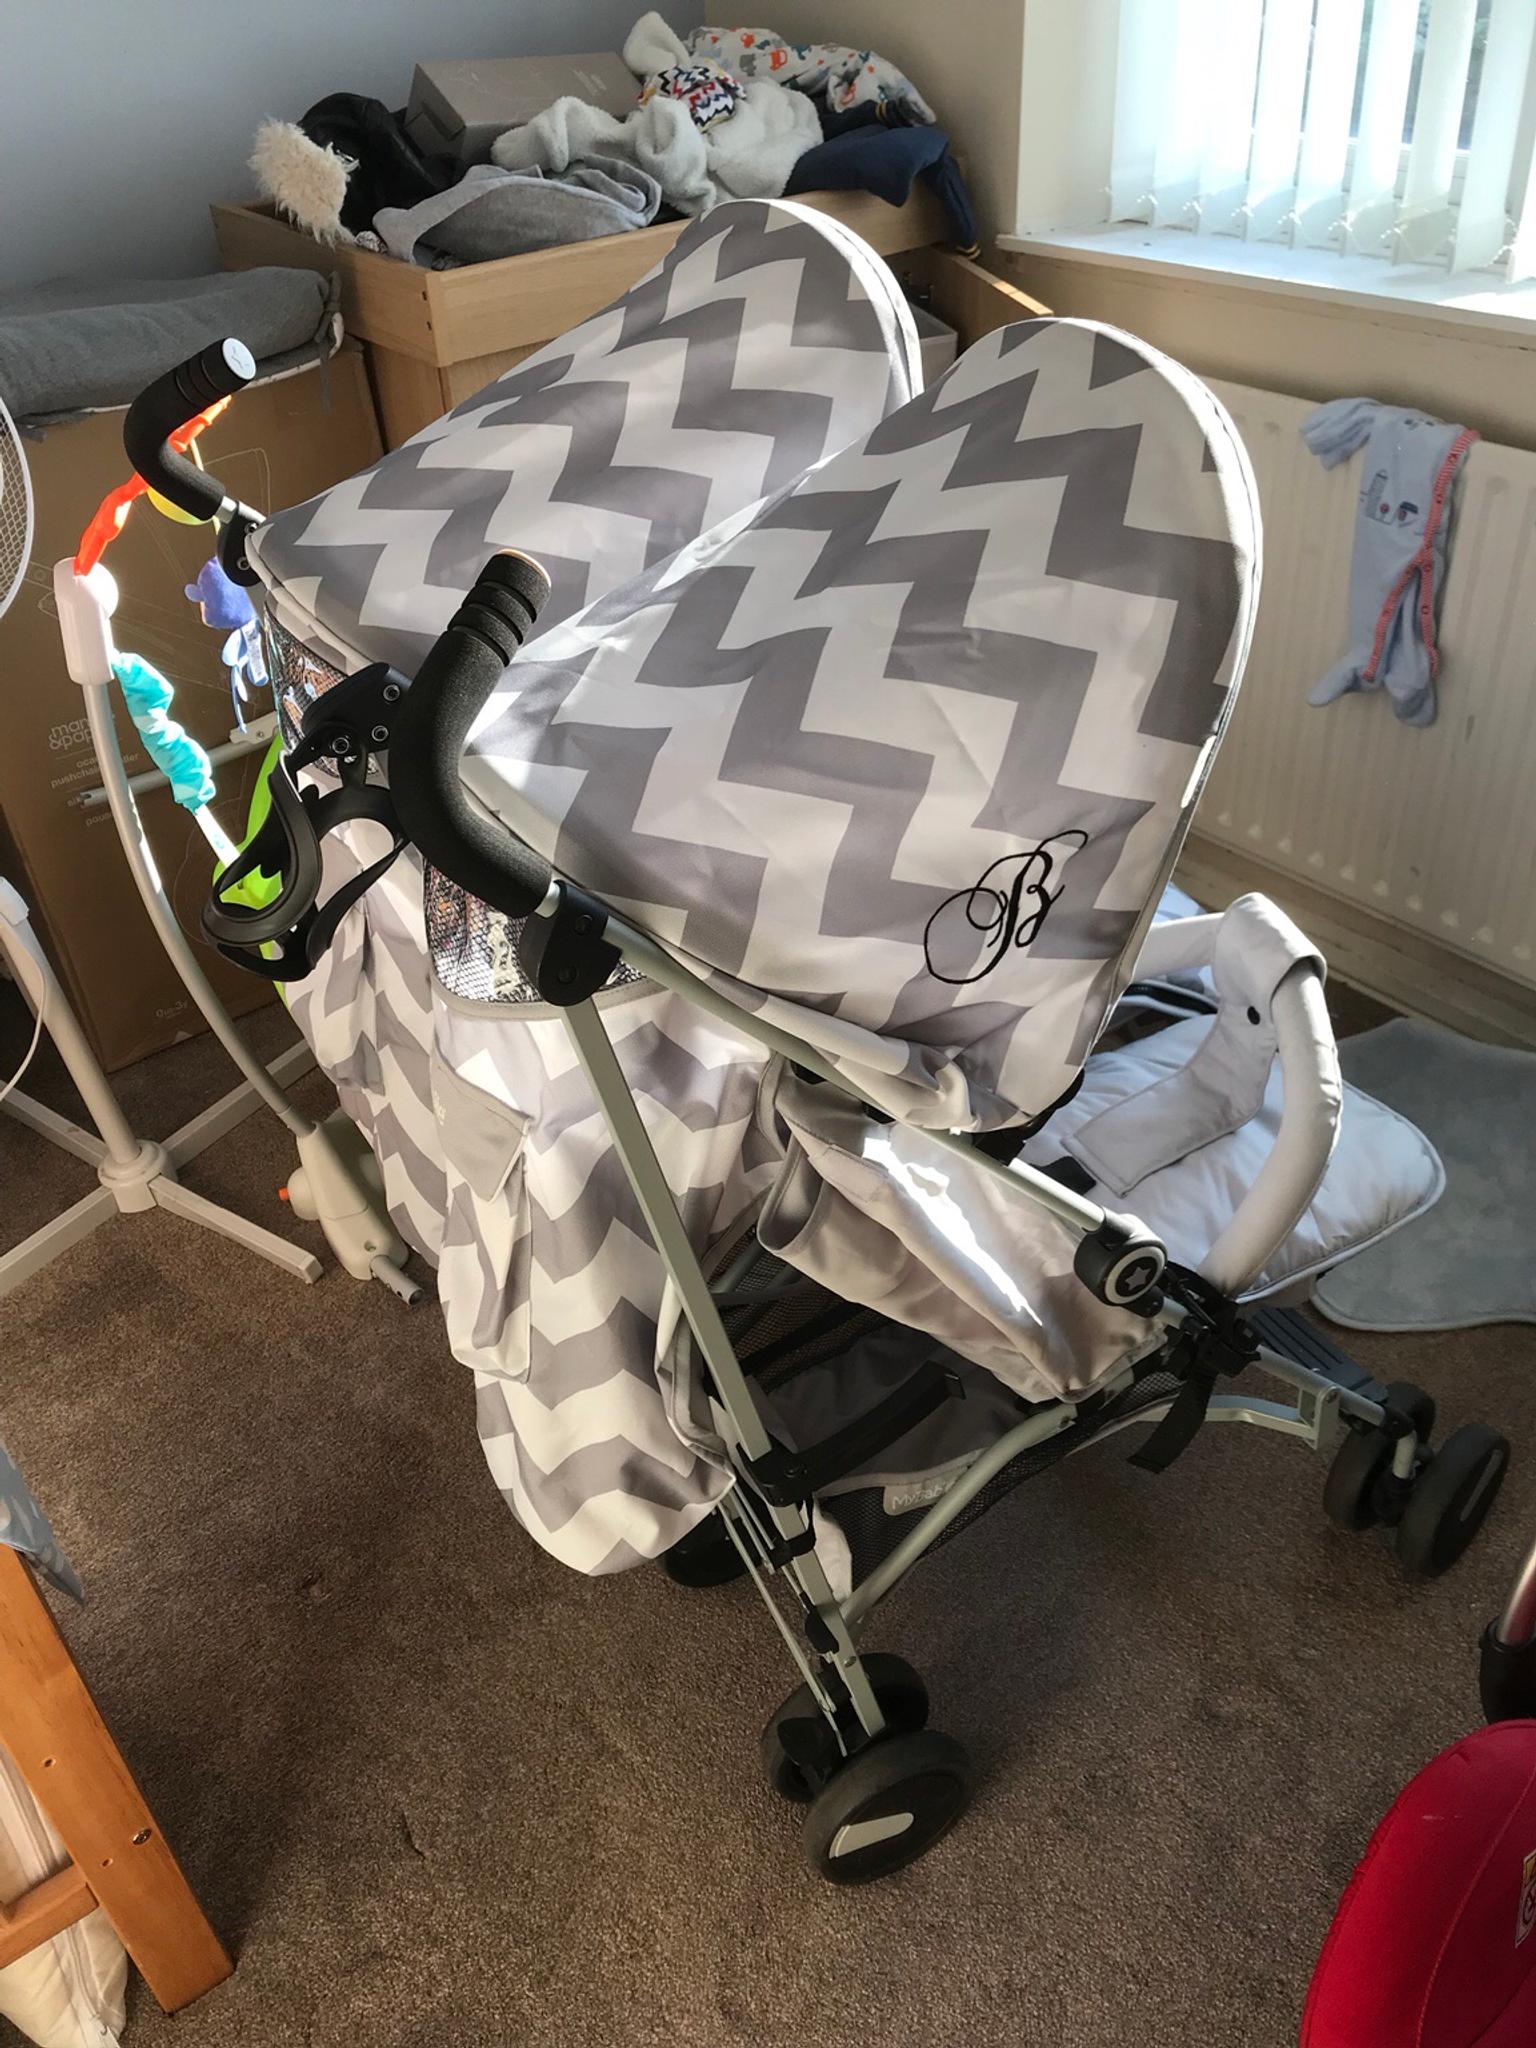 double stroller with footmuffs